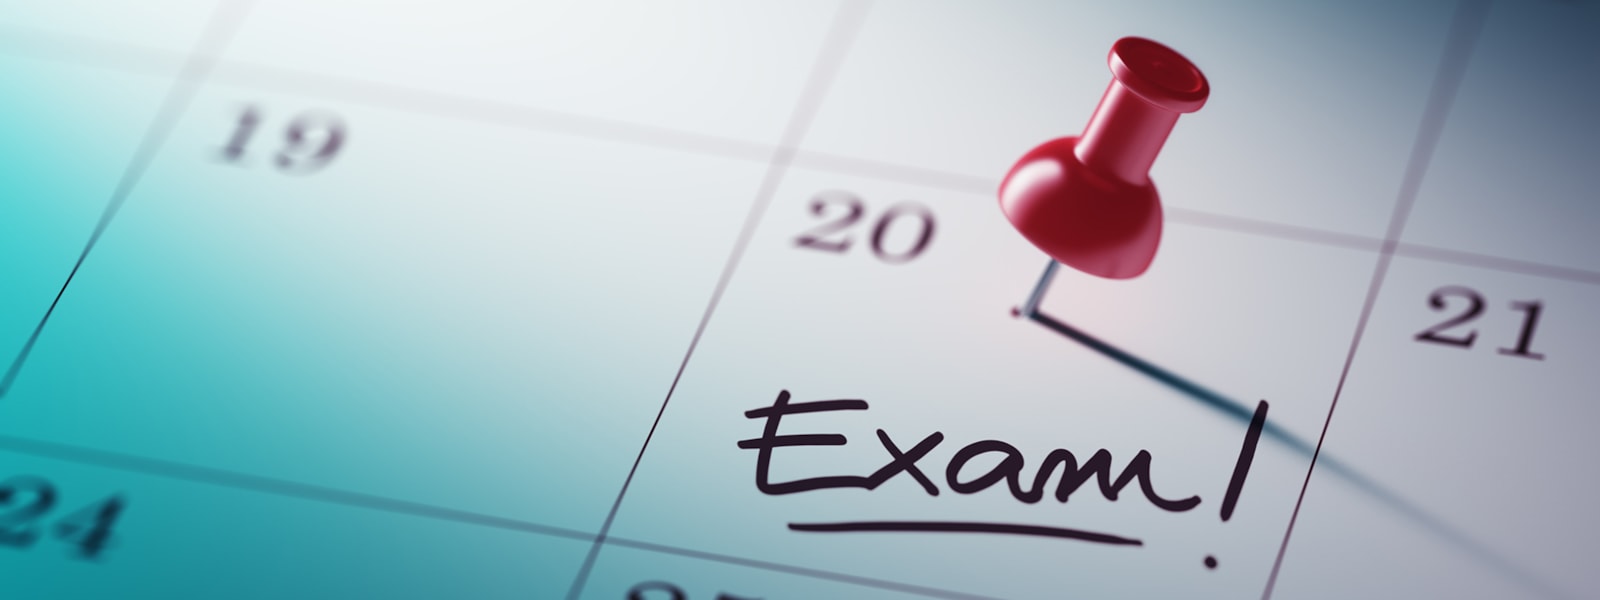 Exam on calendar with a pin